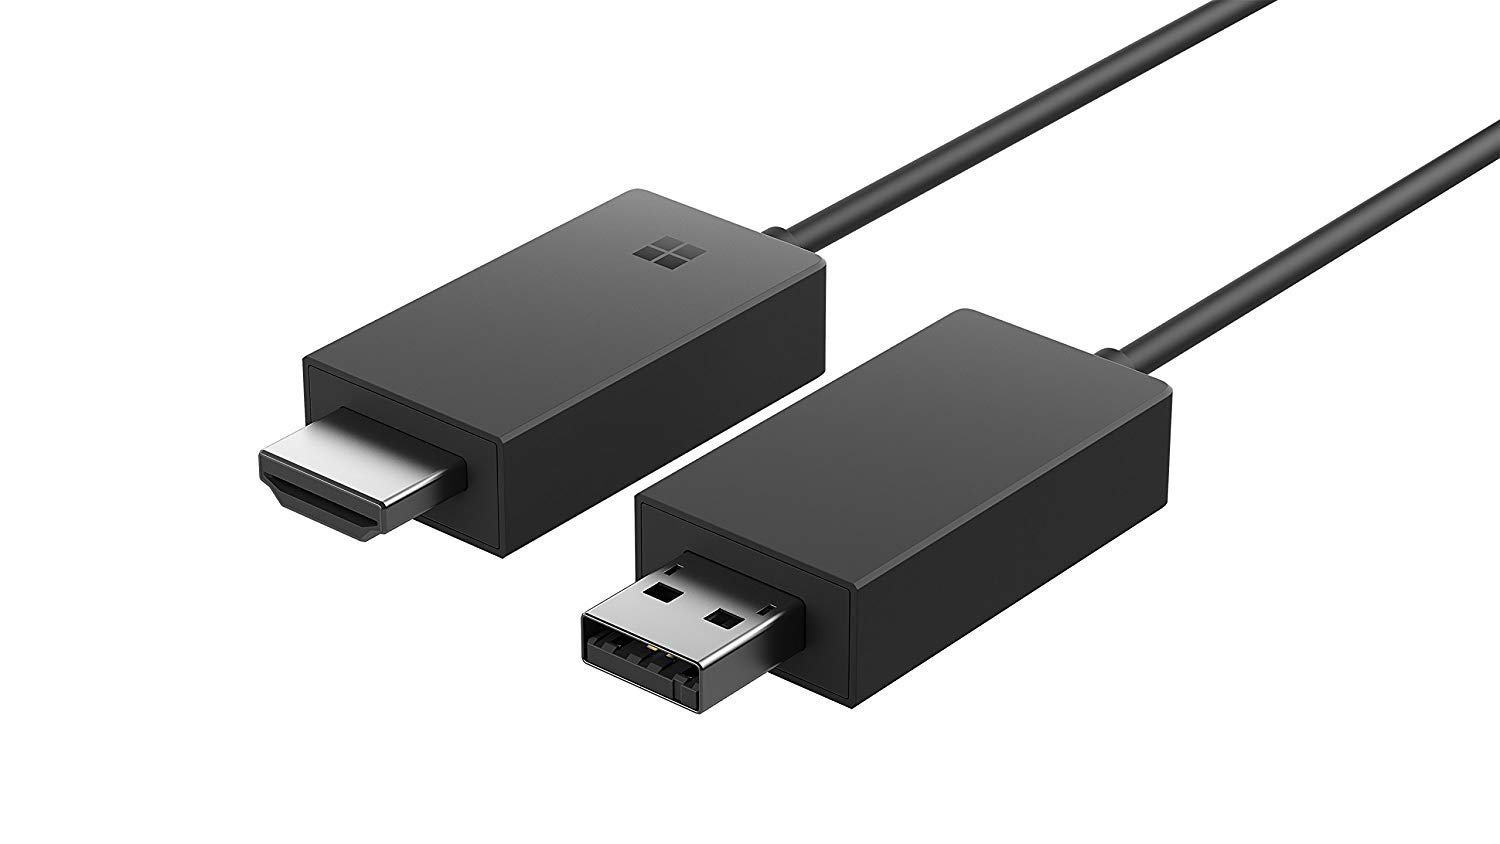 Save the changes and exit the settings.
Restart your Windows device and the Microsoft Wireless Display Adapter.